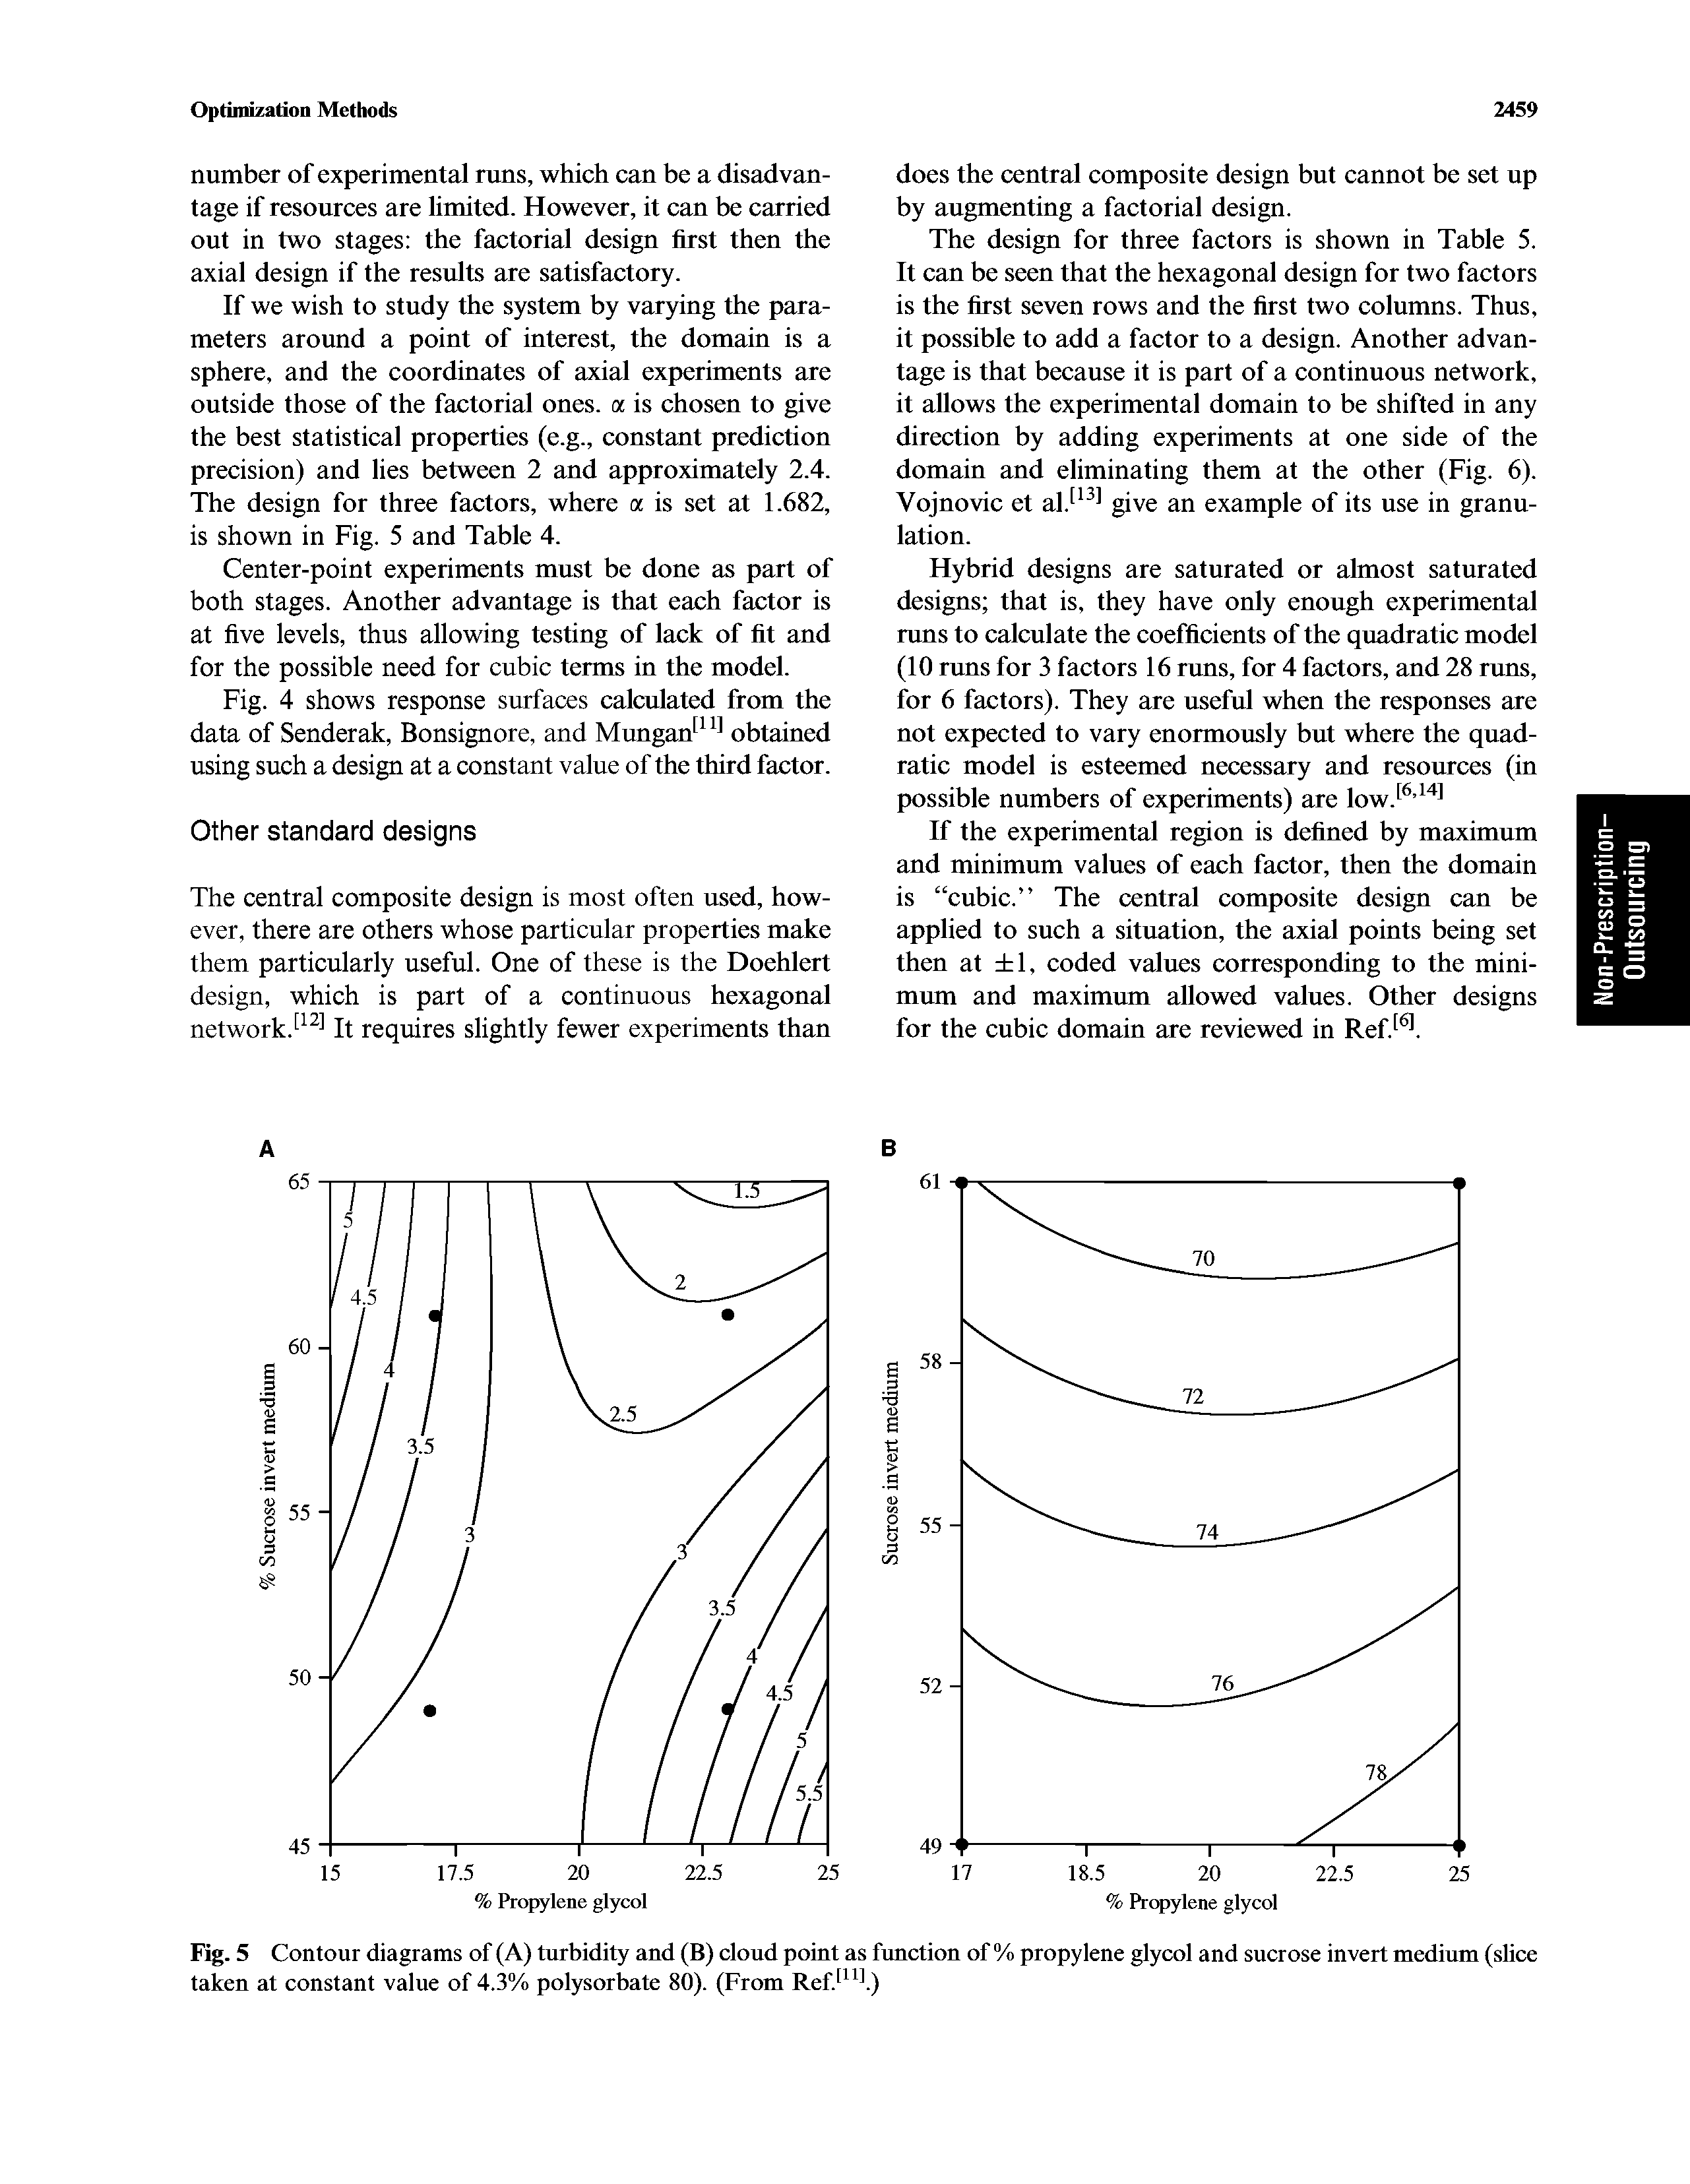 Fig. 5 Contour diagrams of (A) turbidity and (B) cloud point as function of % propylene glycol and sucrose invert medium (slice taken at constant value of 4.3% polysorbate 80). (From Ref. f)...